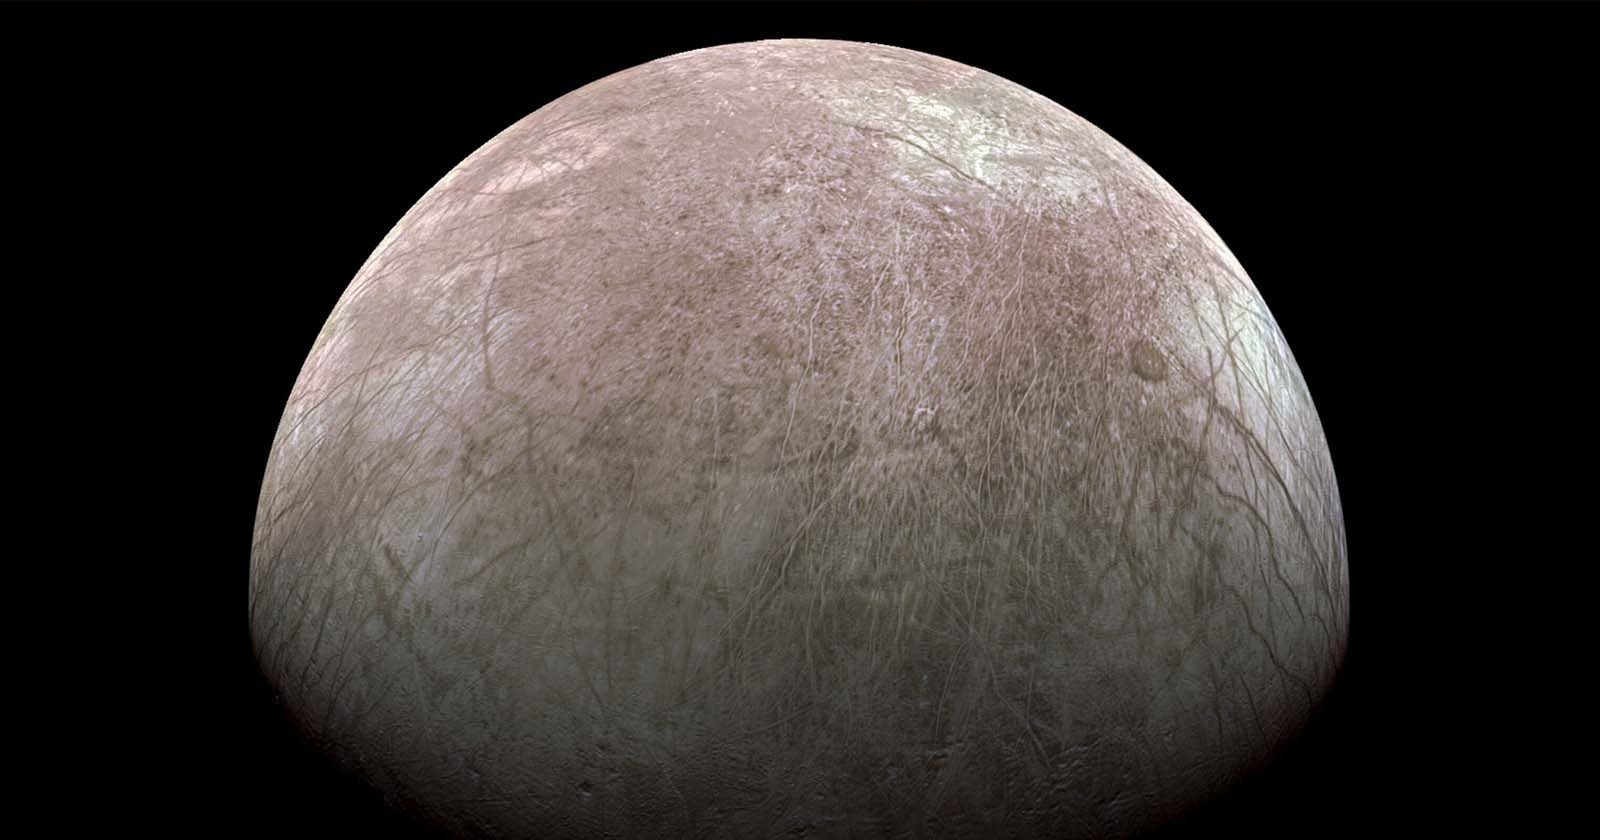  newly processed europa show details icy moon 